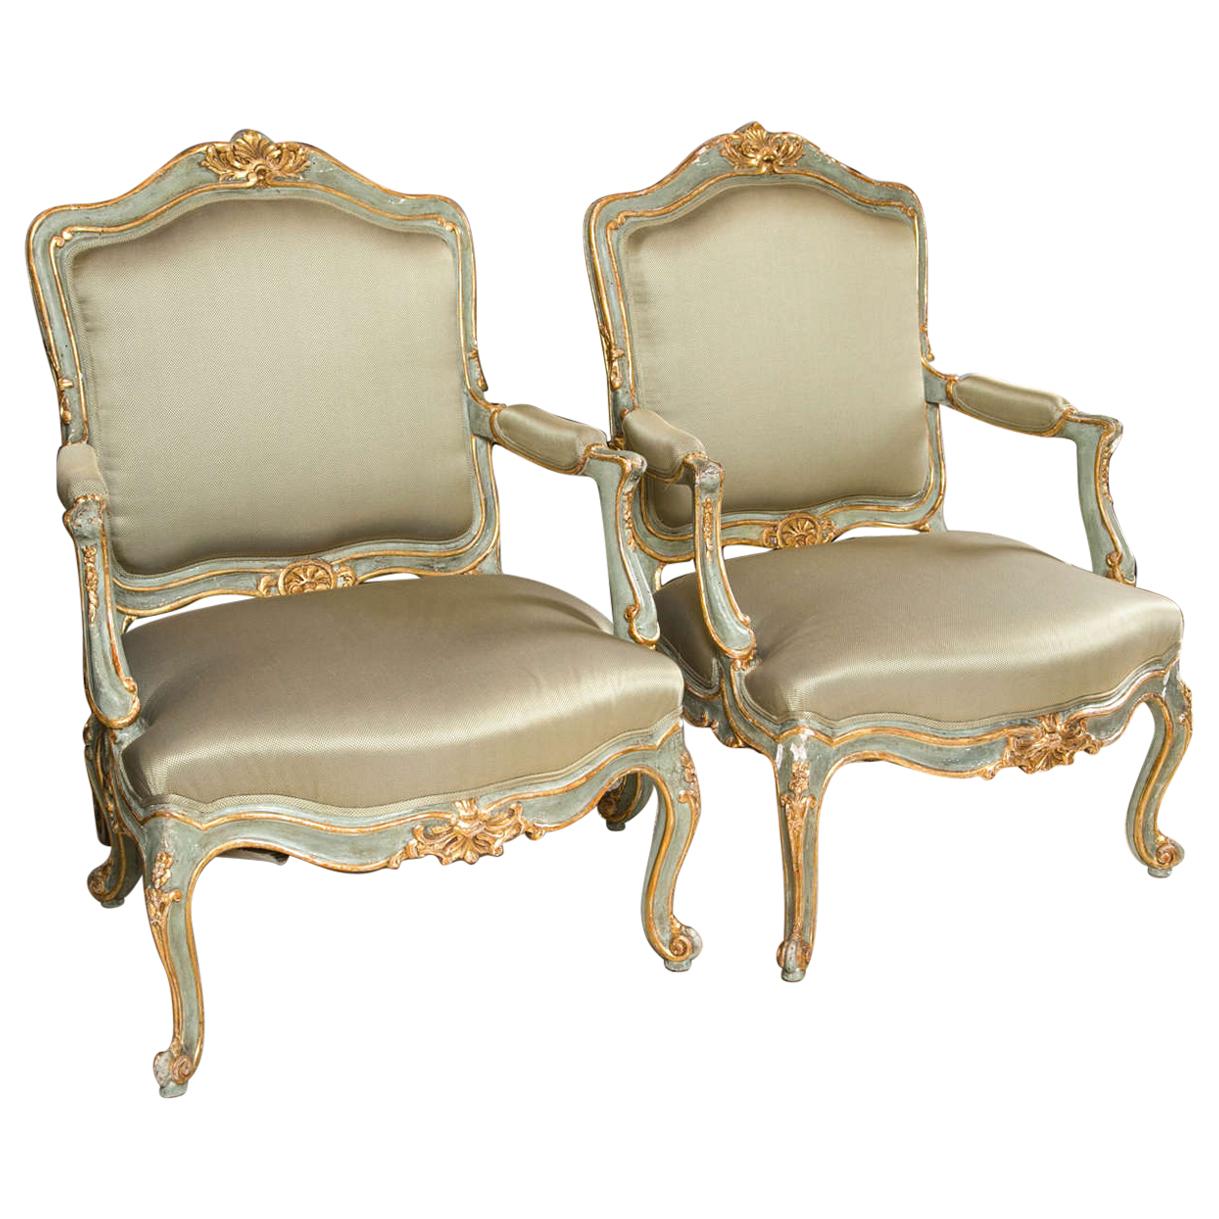 Pair of Early 19 Century Louis XVI Style Parcel-Gilt & Paint Decorated Armchairs